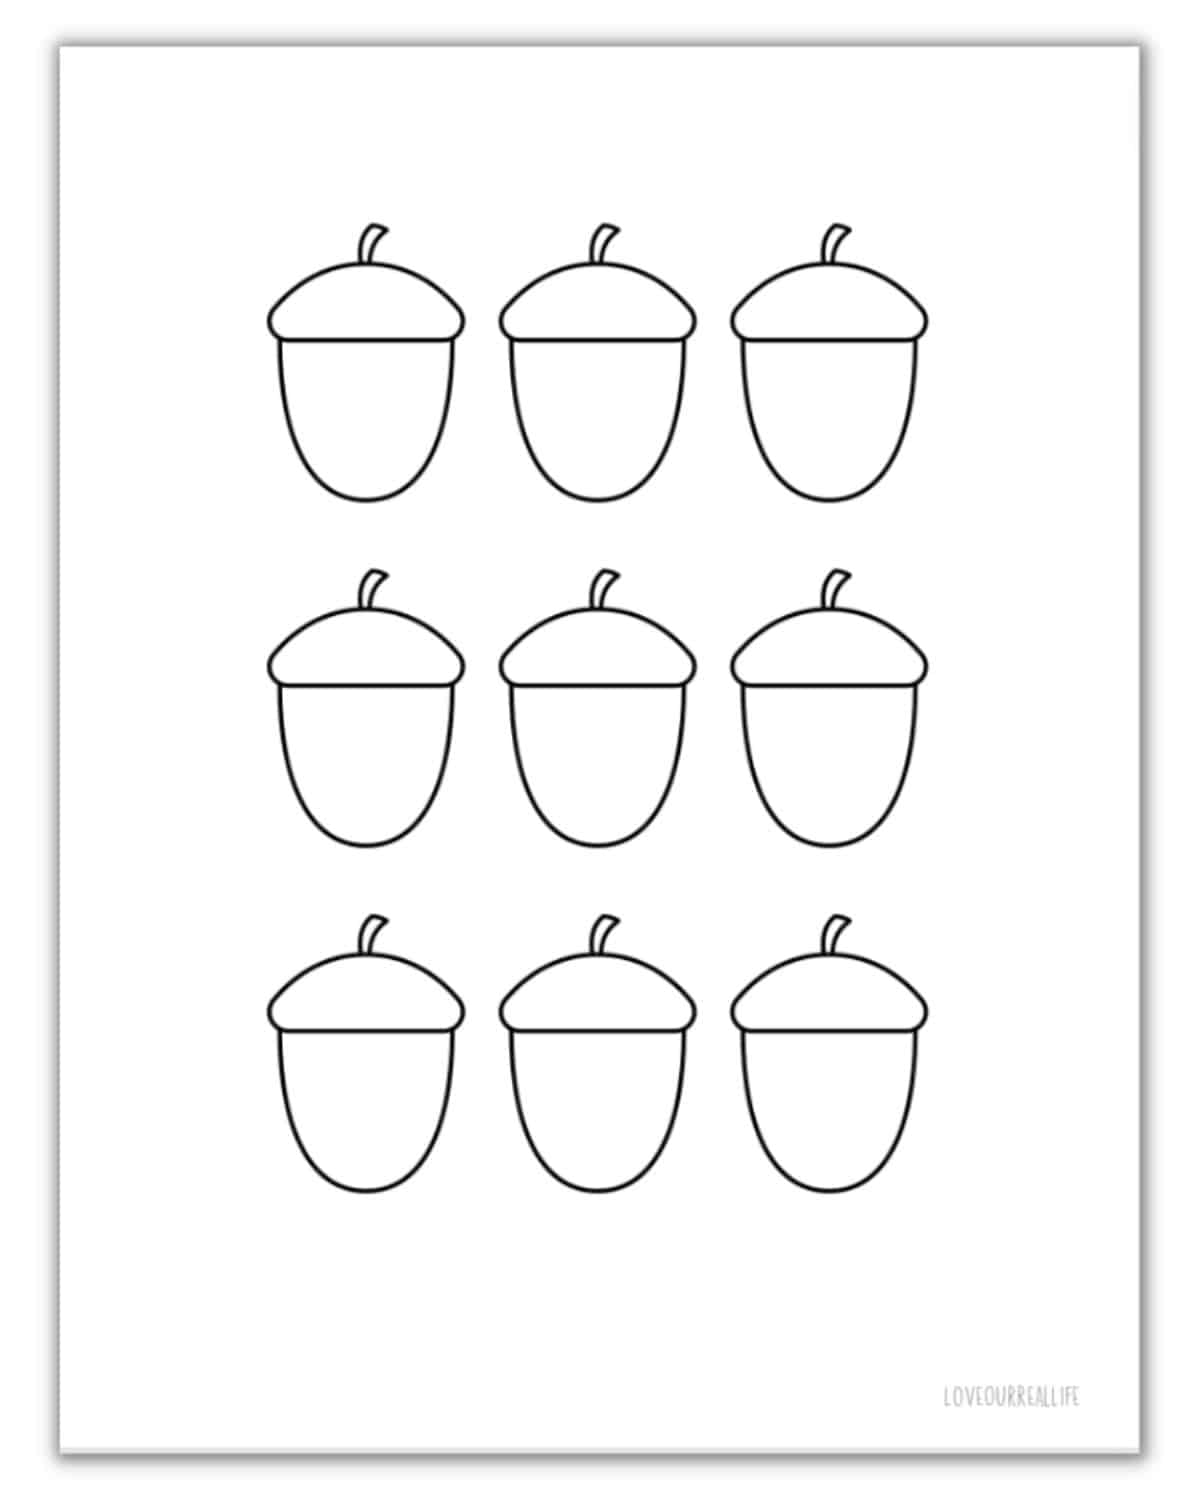 Smaller sized acorn templates in black and white on printable.